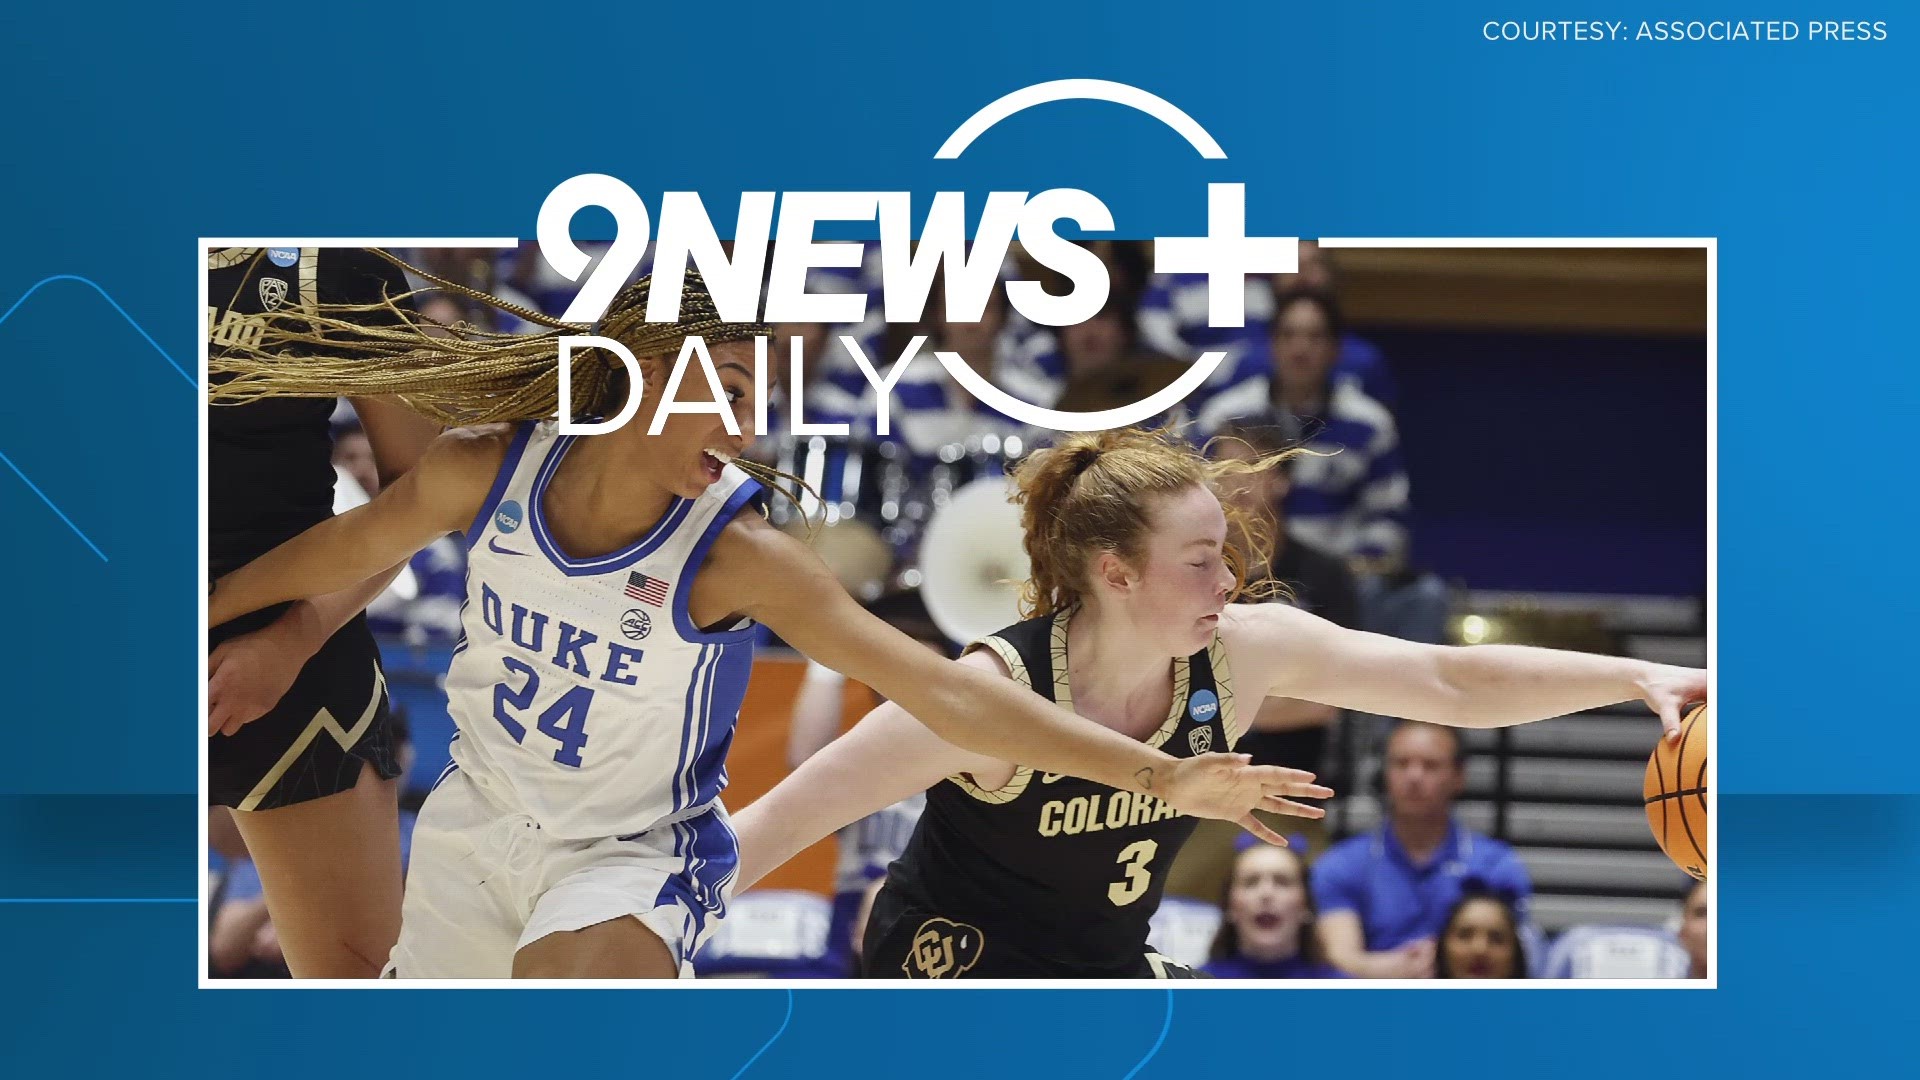 The Colorado Buffaloes women are heading to the Sweet 16 of the NCAA tournament on Friday for the first time in 20 years after beating Duke in overtime.